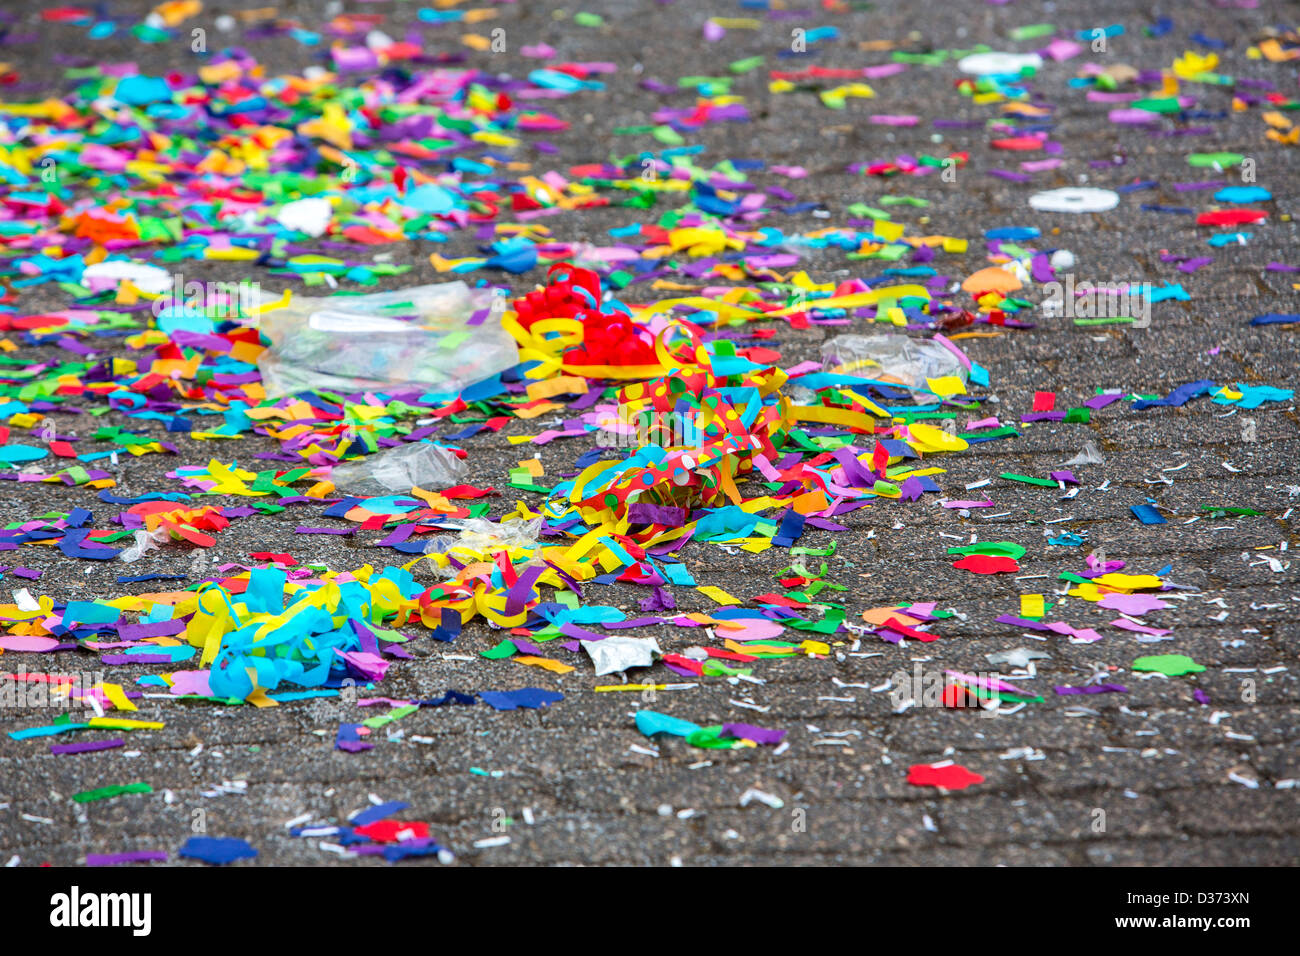 Colored confetti, paper waste on a street, after a carnival parade. Stock Photo